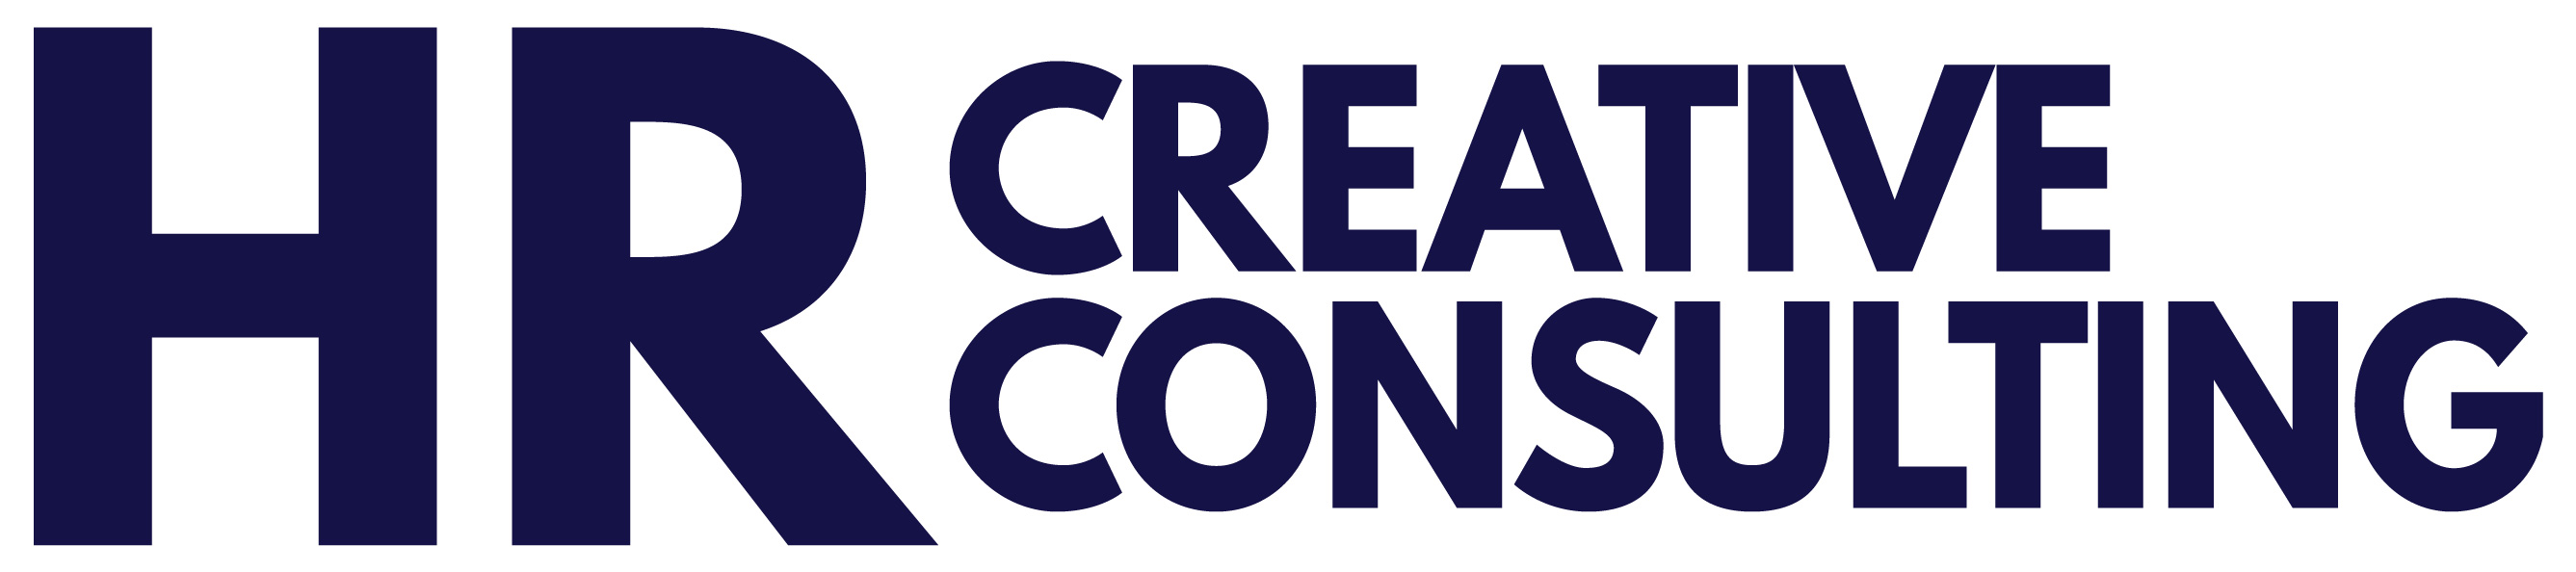 HR Creative Consulting